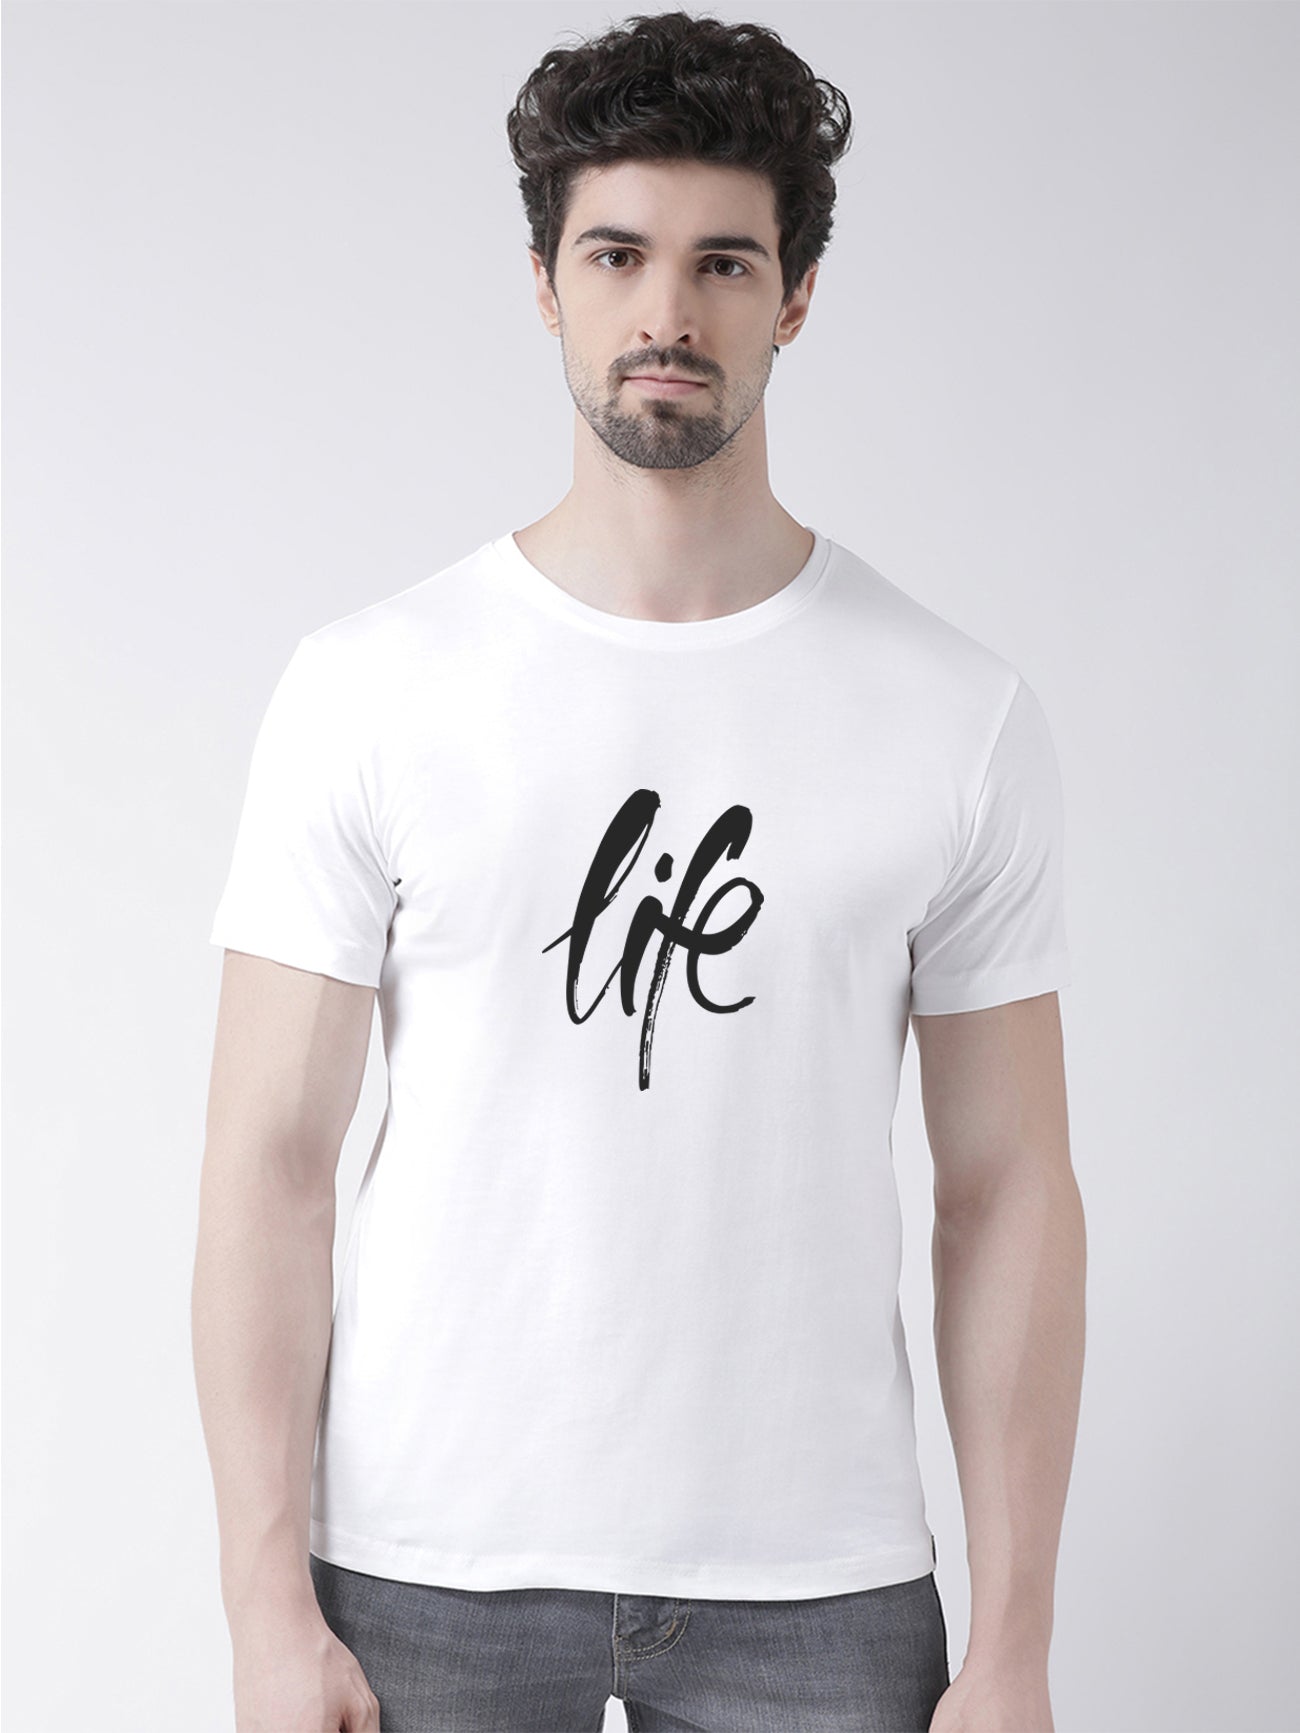 Life Printed Round Neck T-shirt - Friskers